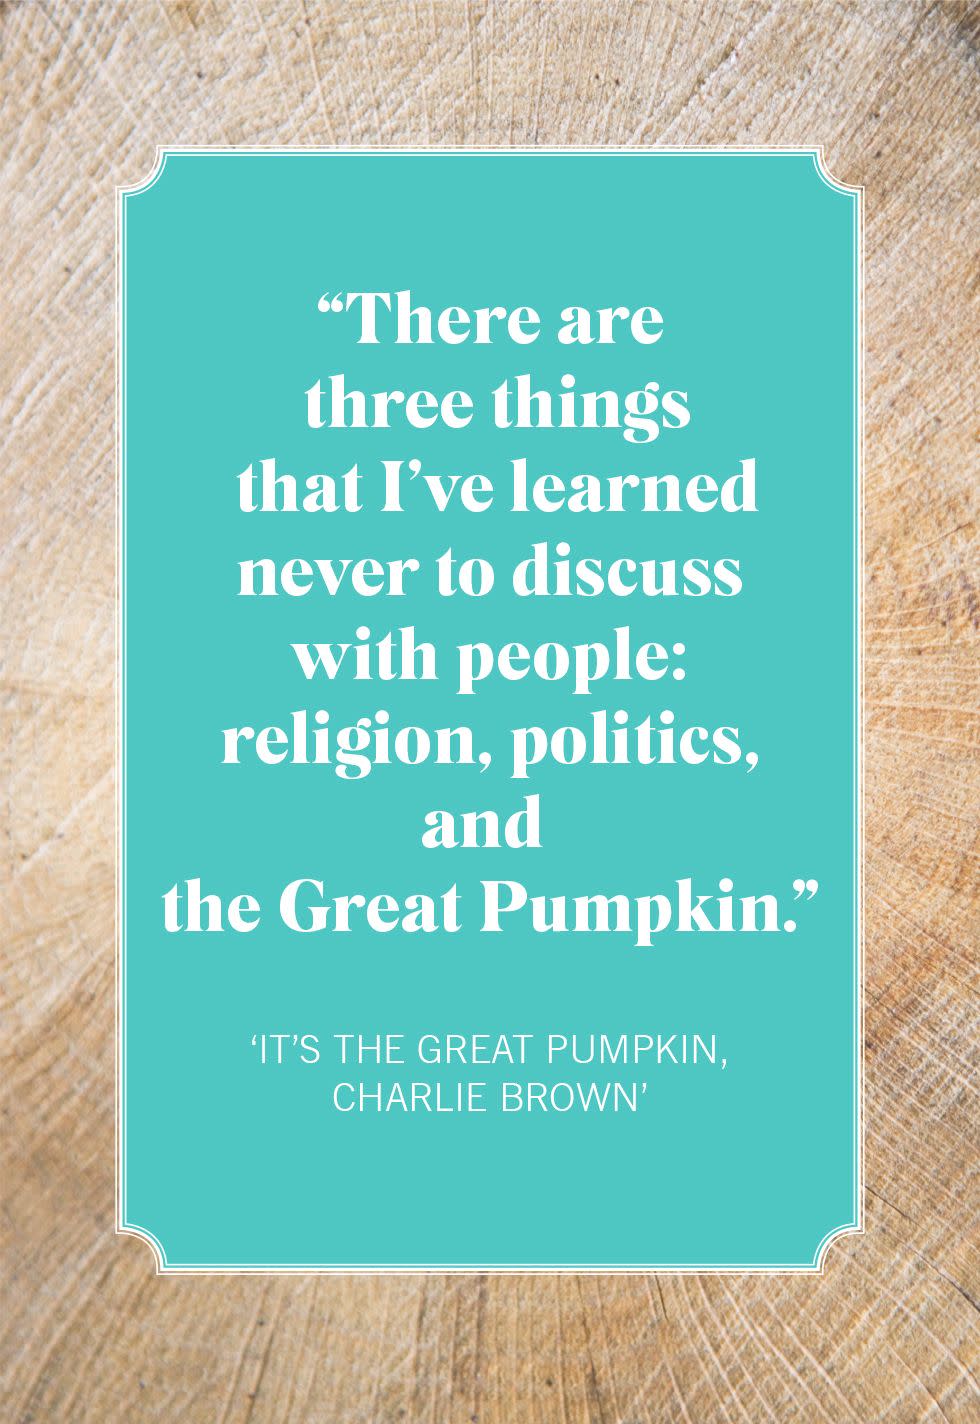 pumpkin quotes 'it's the great pumpkin, charlie brown'